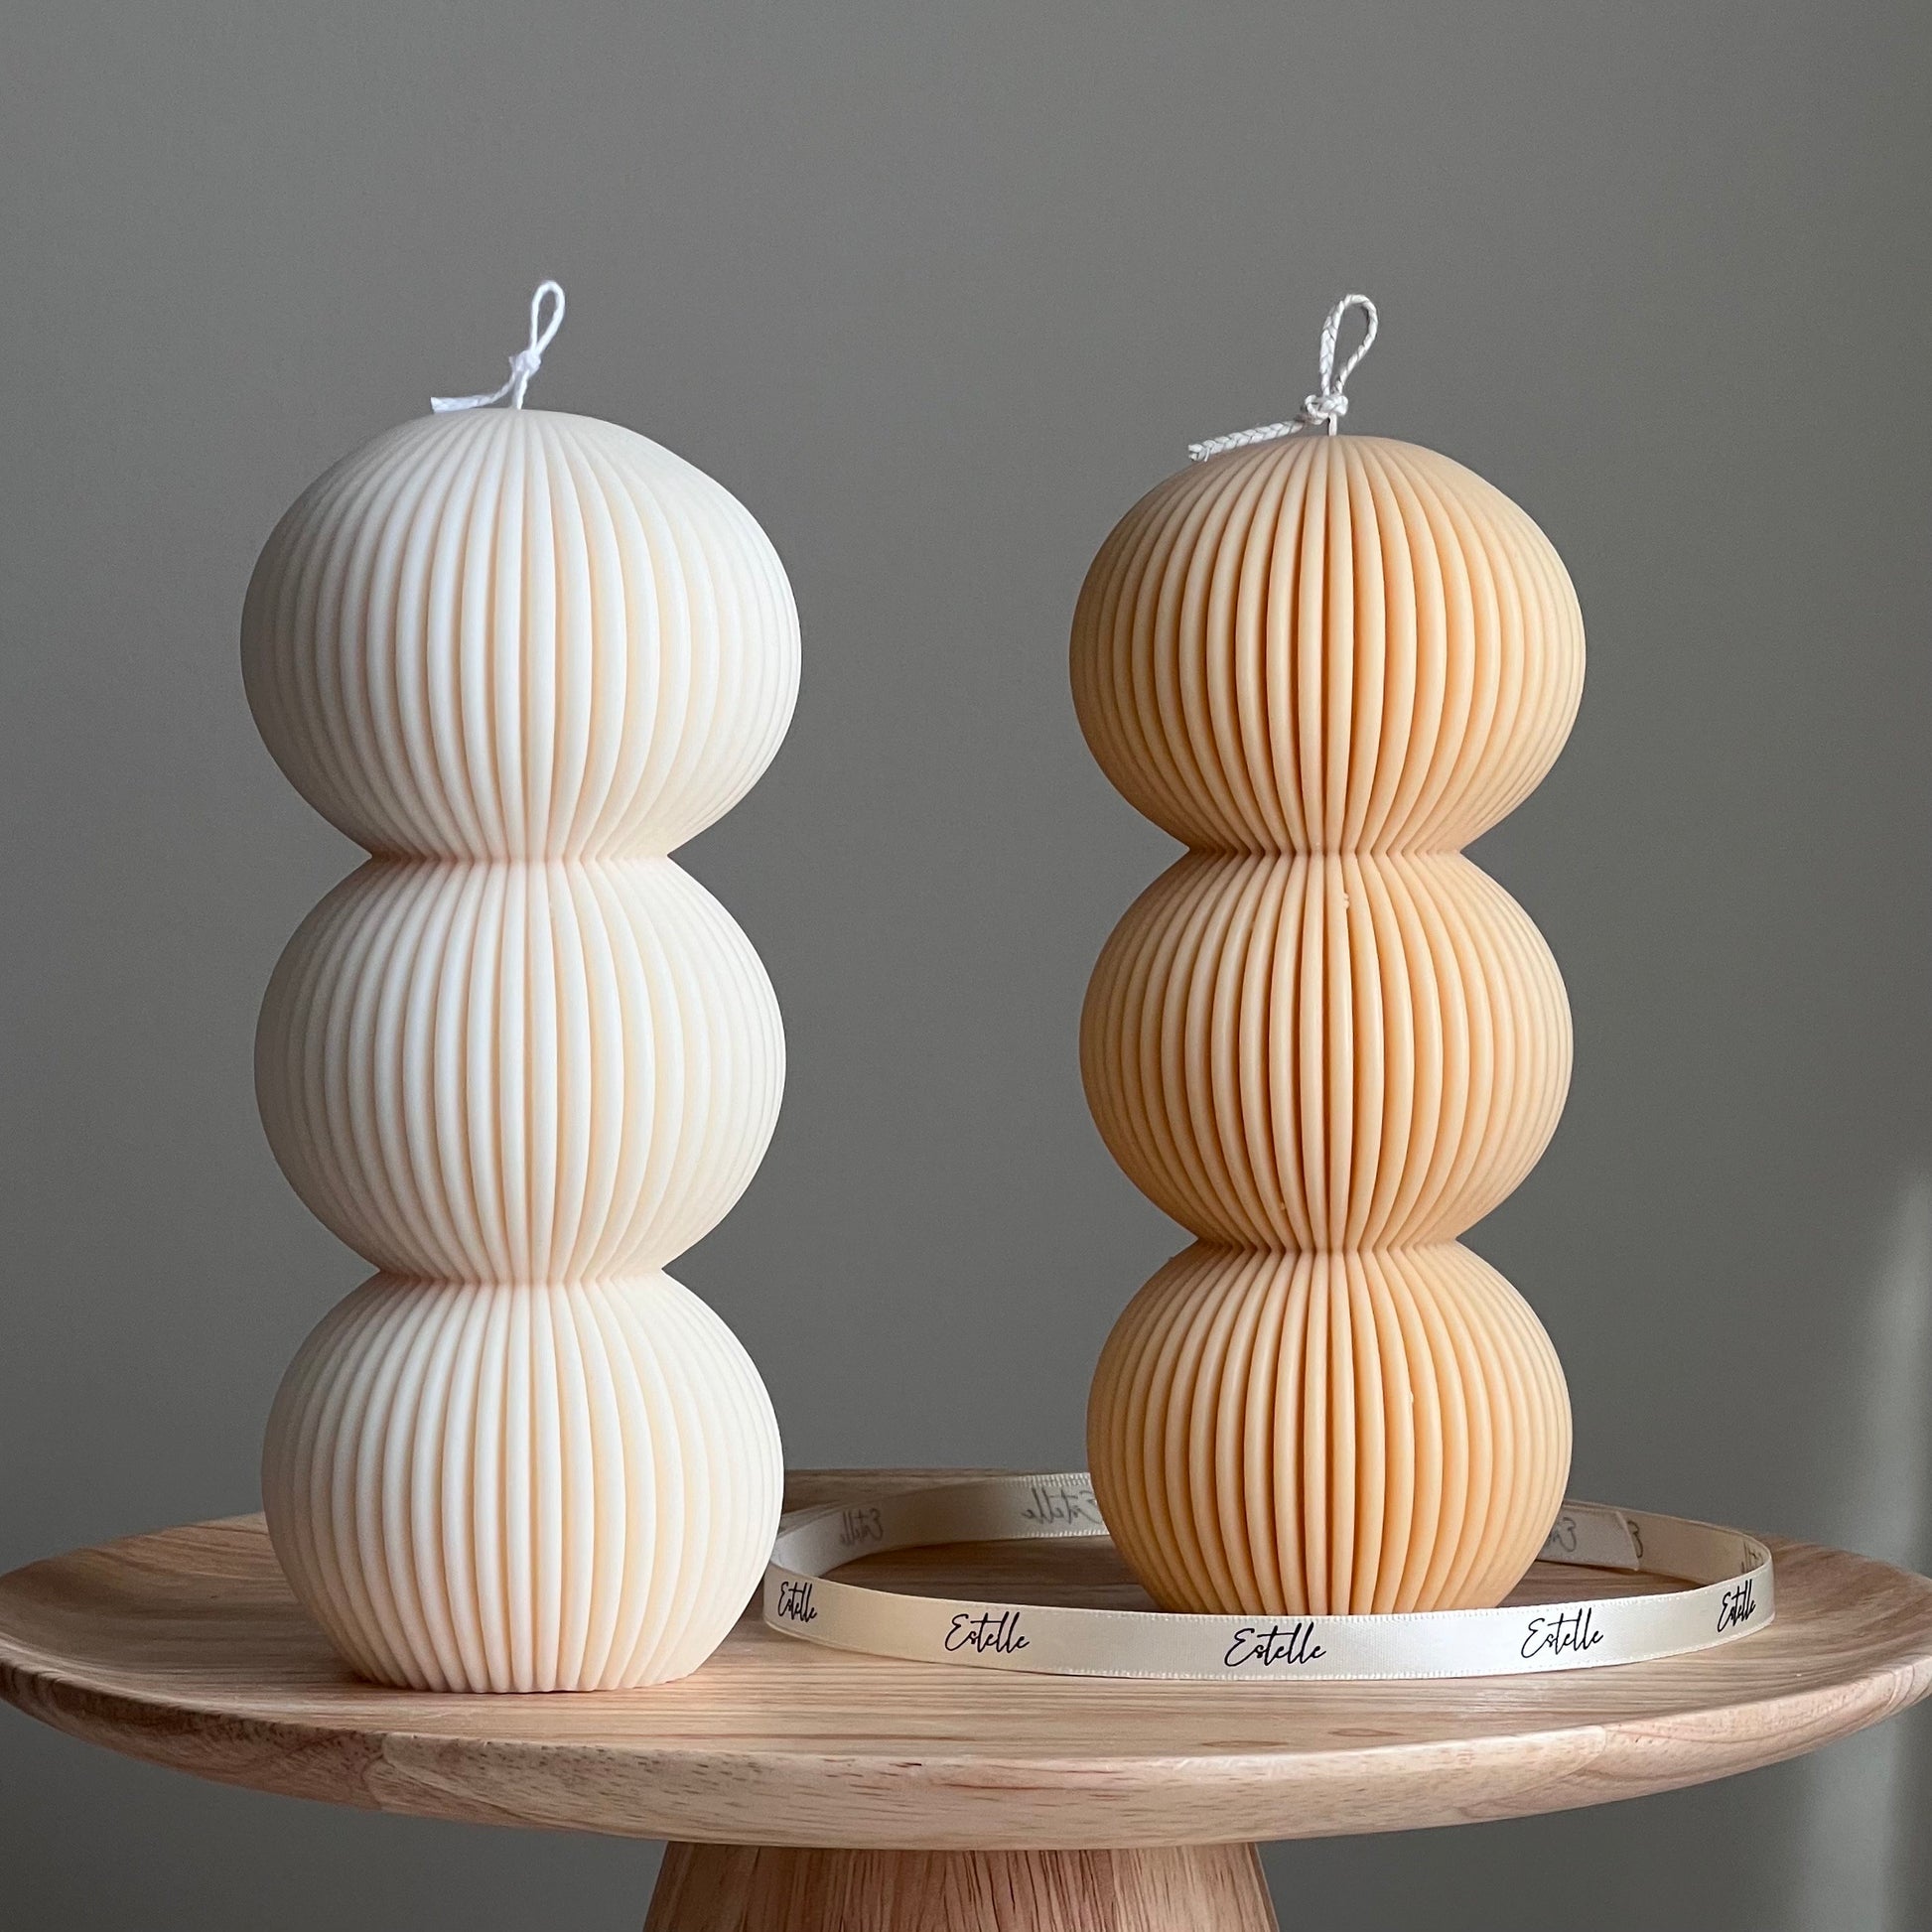 Ribbed Balls Pillar Candle | Soy Wax Candle | Decorative Handmade Candle | Aesthetic Candle| Shaped Candle| Unscented Candles| Unique Candle